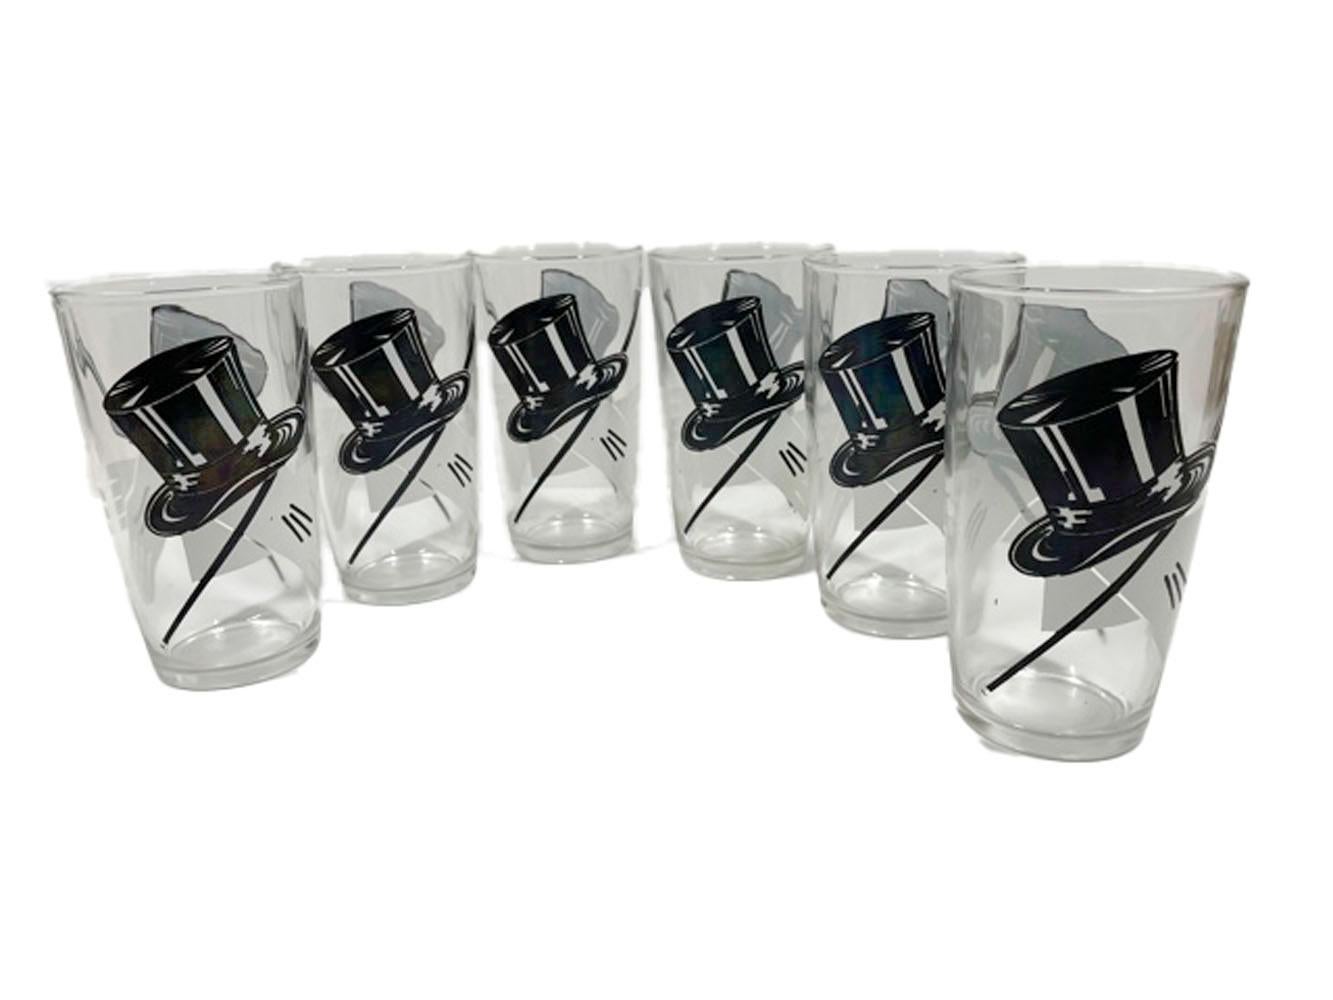 Set of six Art Deco highball glasses by Hazel Atlas decorated with top hats, white gloves and canes in black and white enamel on clear glass.